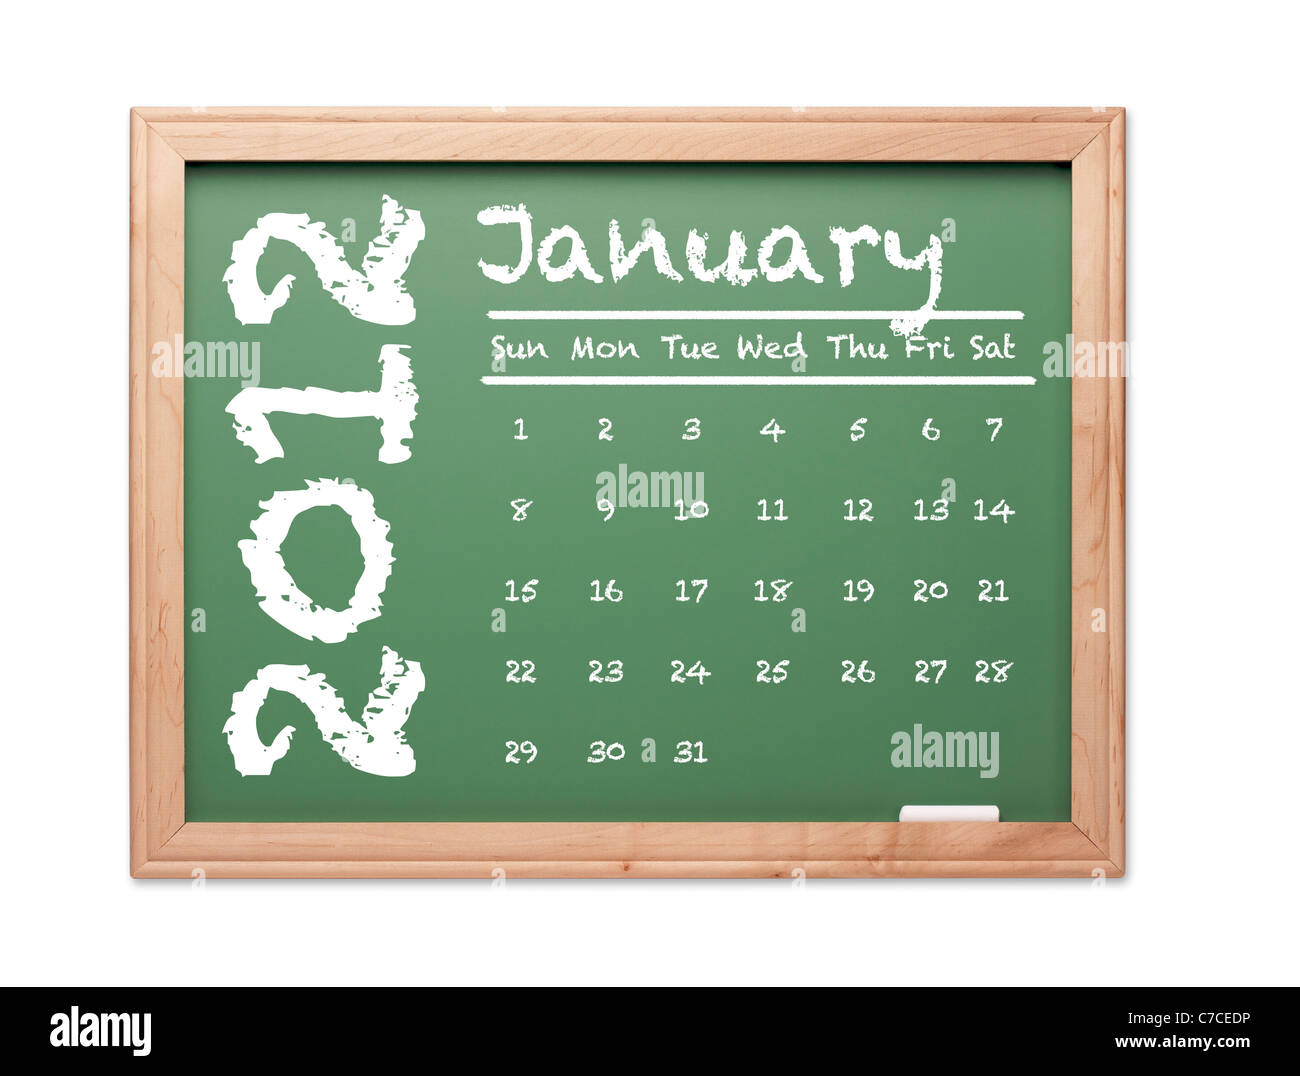 Month Of January 12 Calendar On Green Chalkboard Over White Background Stock Photo Alamy